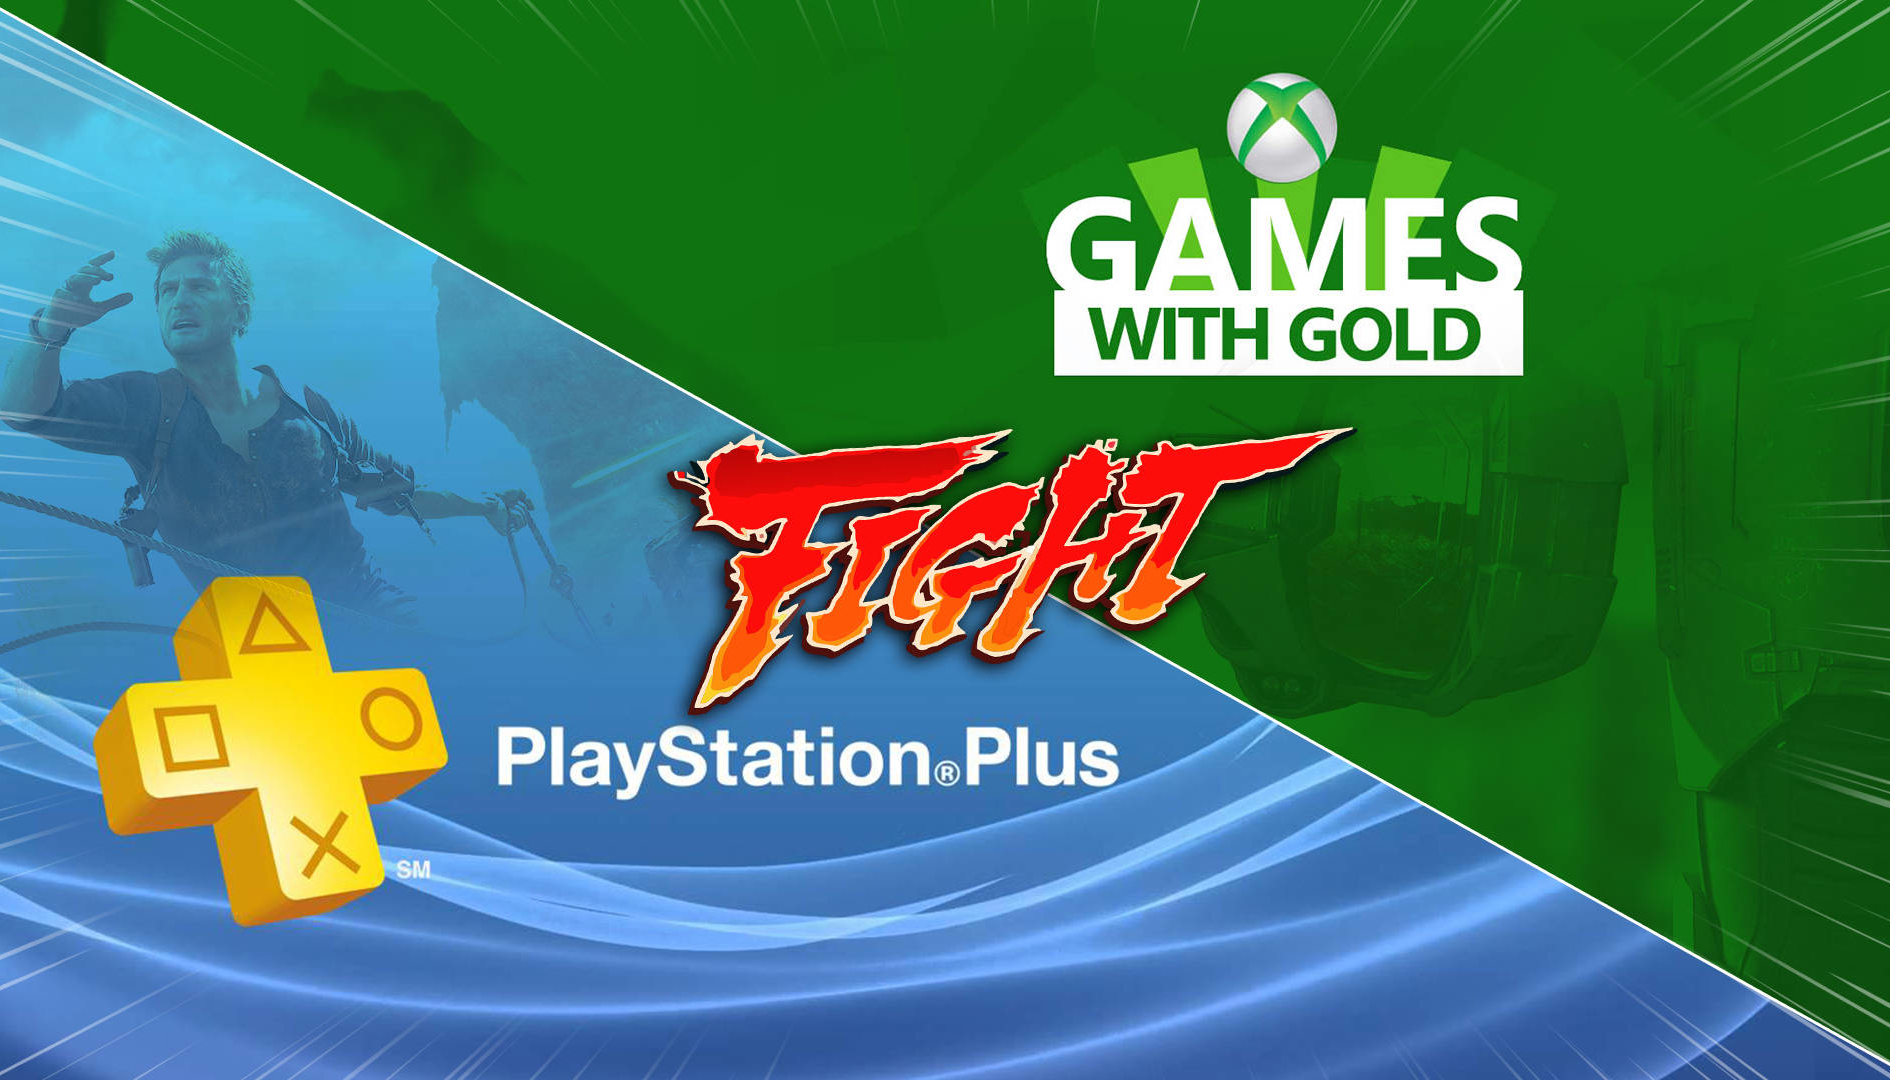 PlayStation Plus vs Games With Gold giugno 2019